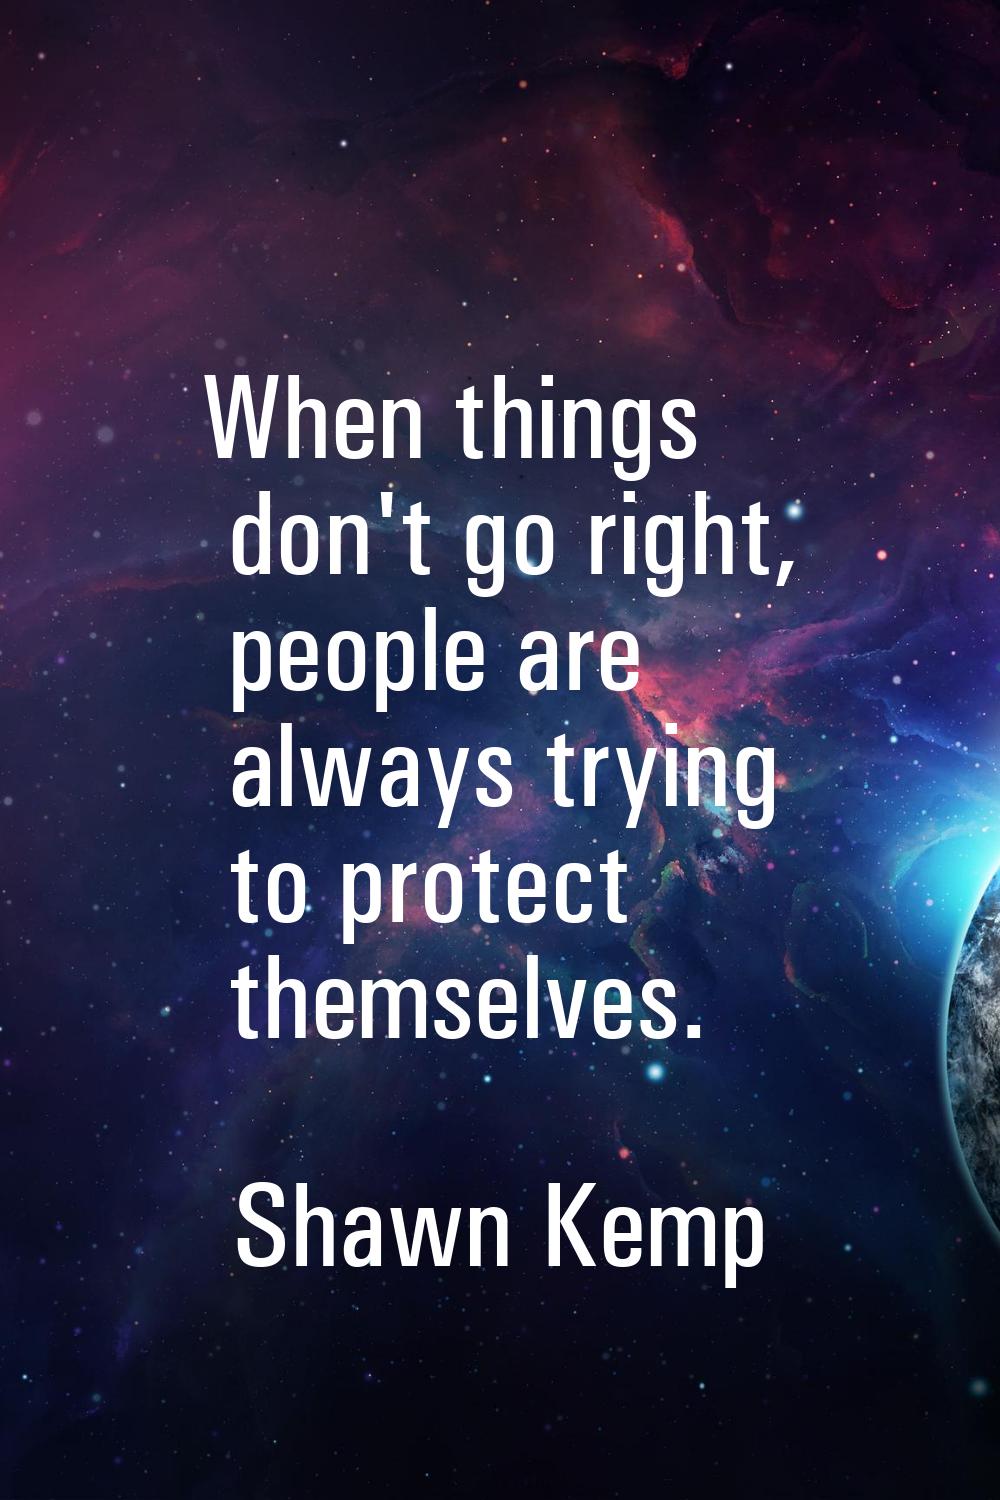 When things don't go right, people are always trying to protect themselves.